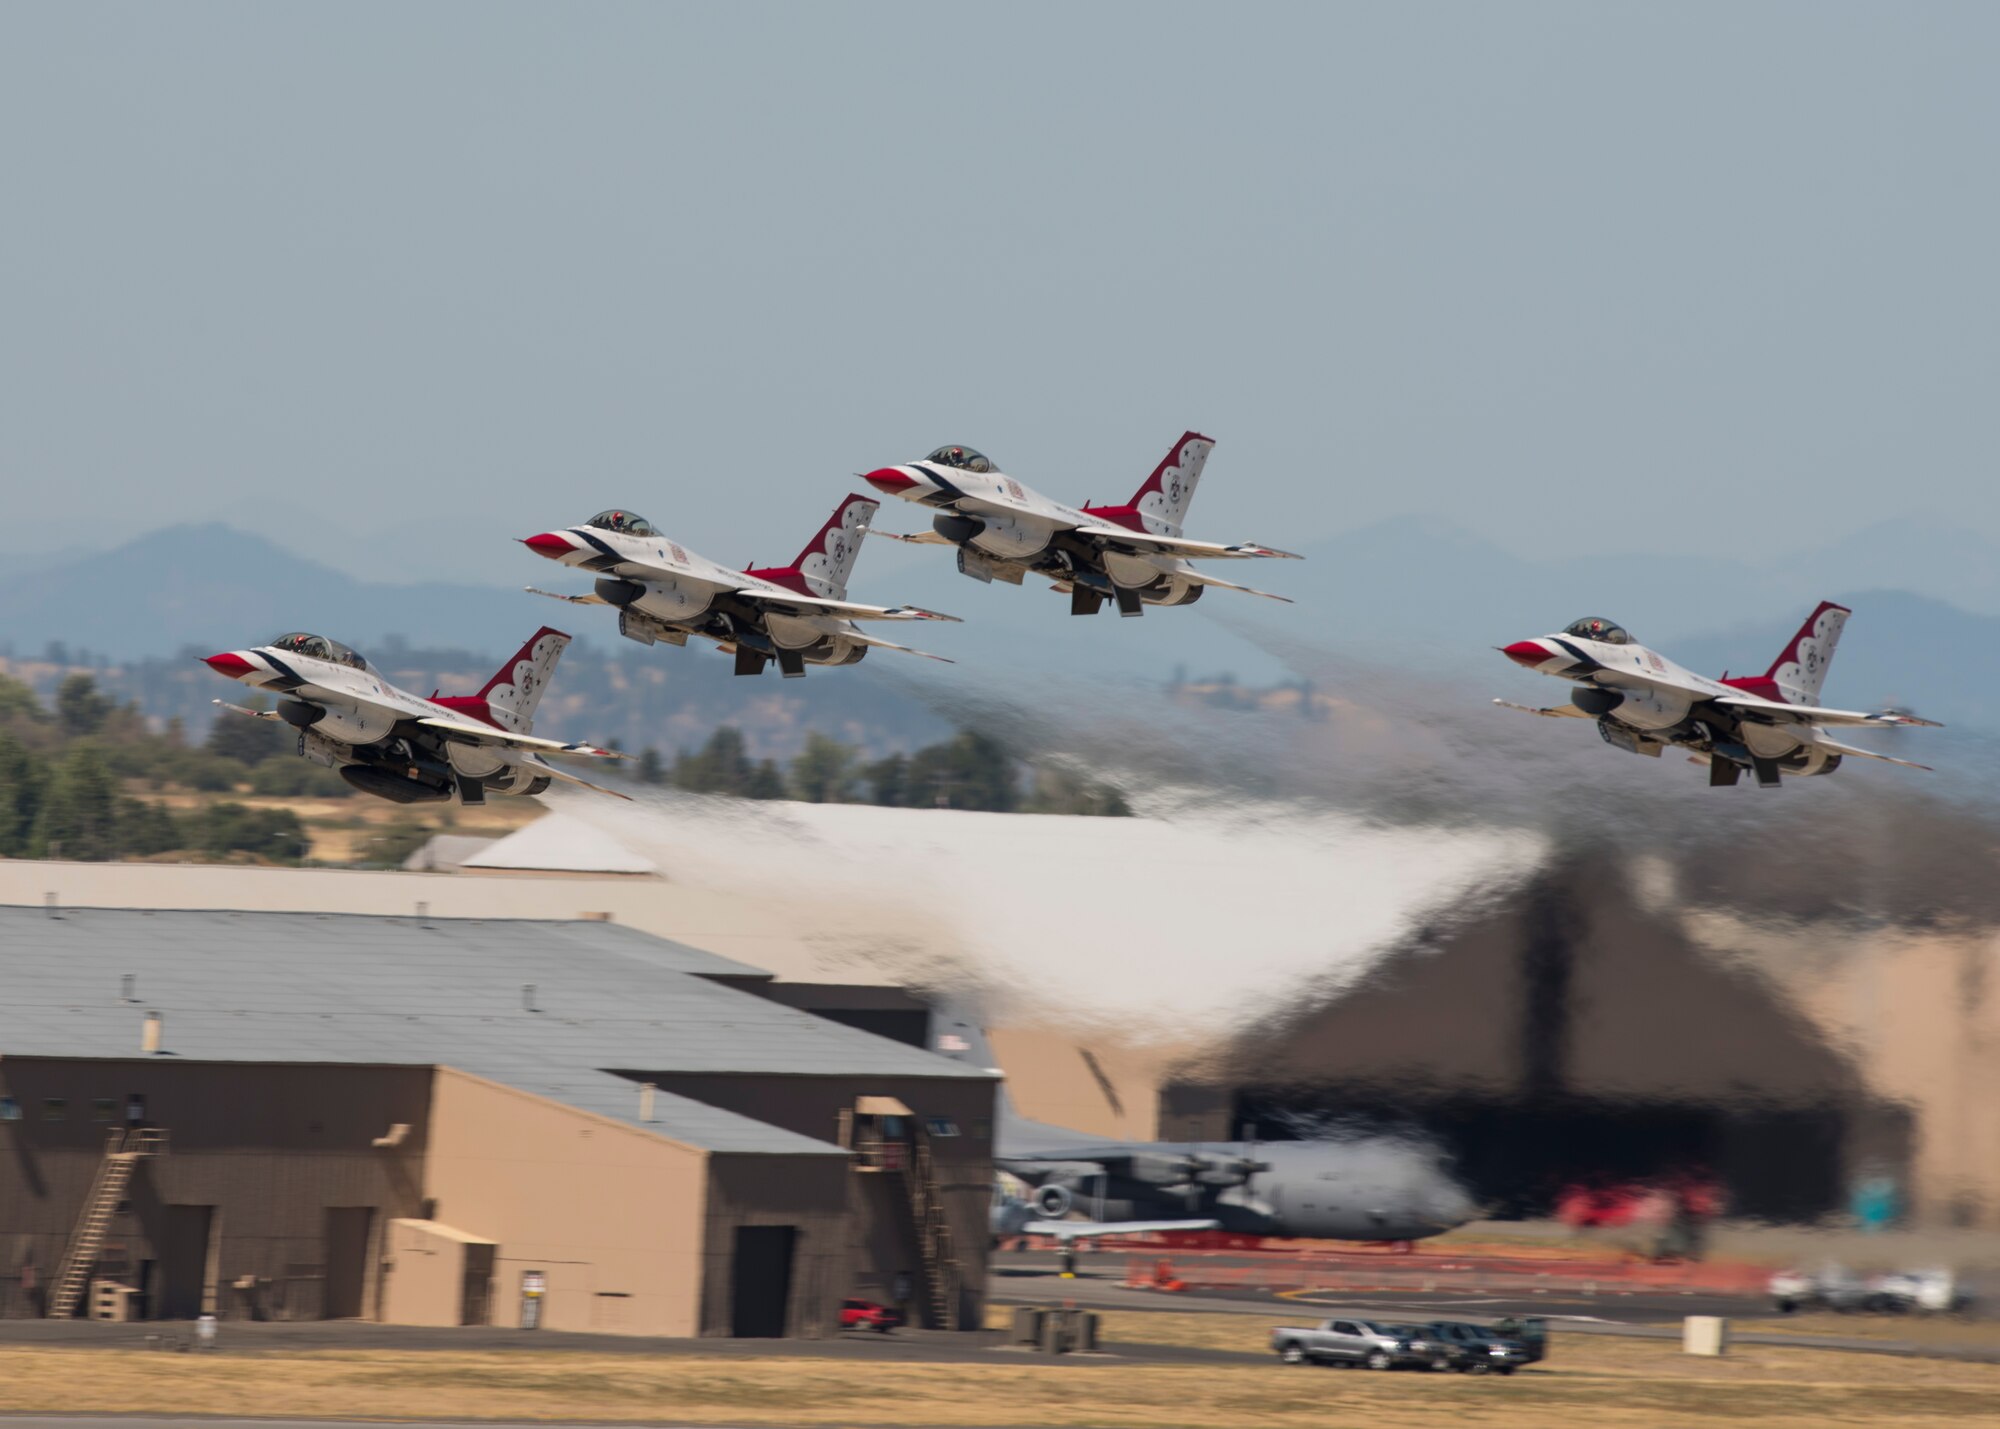 Four F-16 Fighting Falcons from the Thunderbirds aerial demonstration team takeoff in formation as part of their performance at the Skyfest 2017 air show and open house July 30, 2017, at Fairchild Air Force Base, Washington. The Thunderbirds are assigned to the 57th Wing and are based at Nellis Air Force Base, Nevada. (U.S. Air Force photo / Airman 1st Class Ryan Lackey)